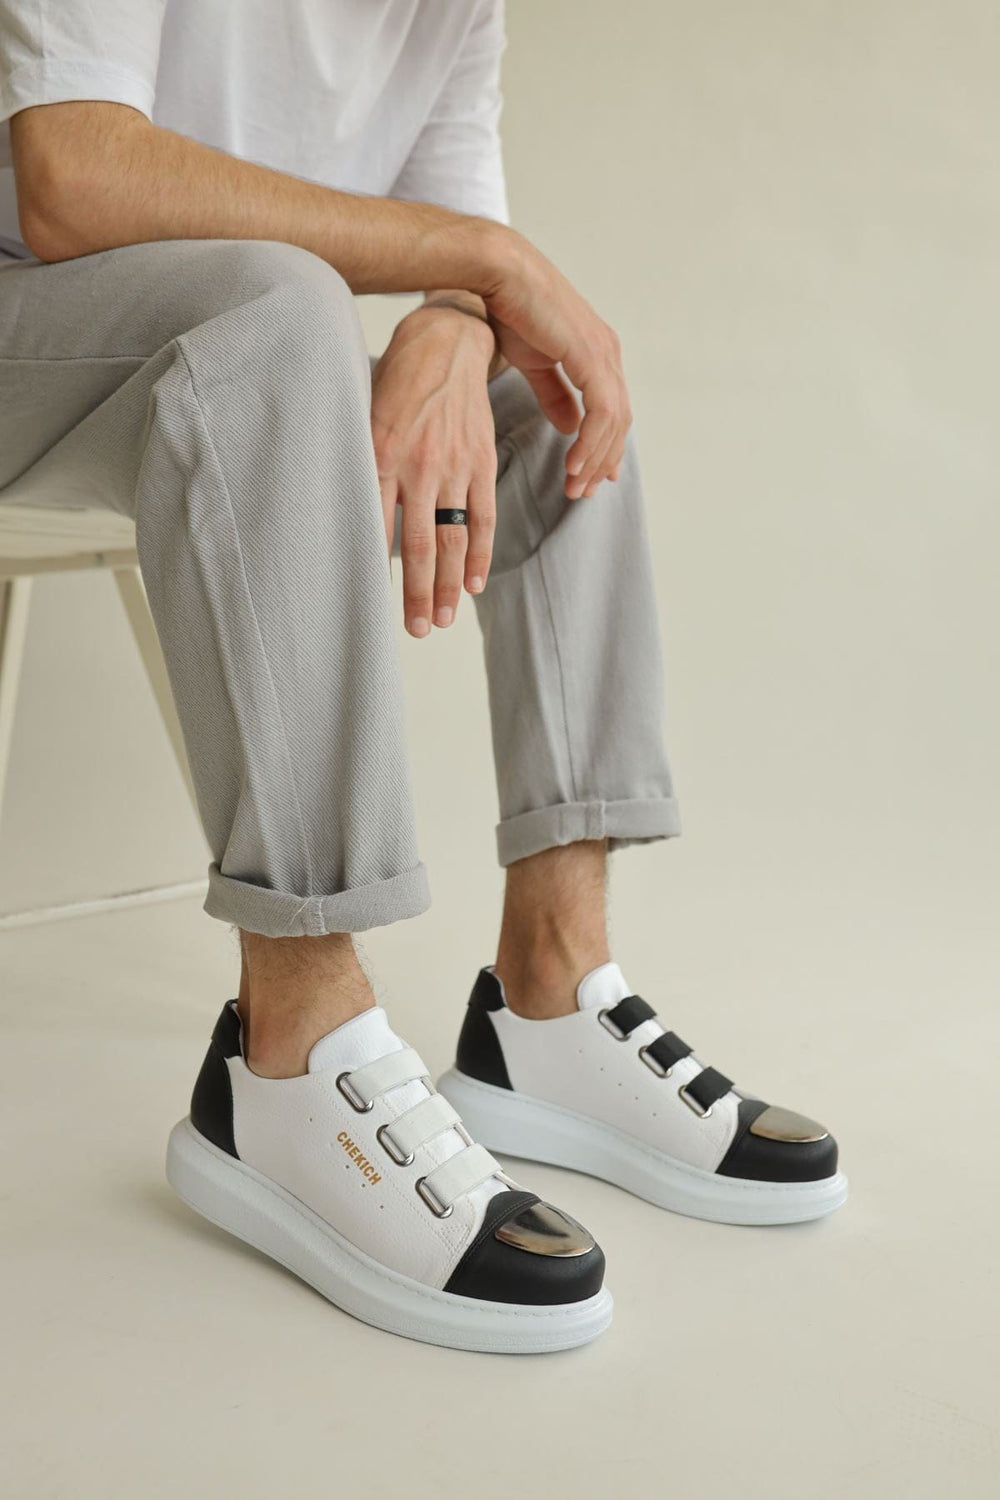 Chekich Men's White Black Casual Shoes ch251 - OUTFITLIFT